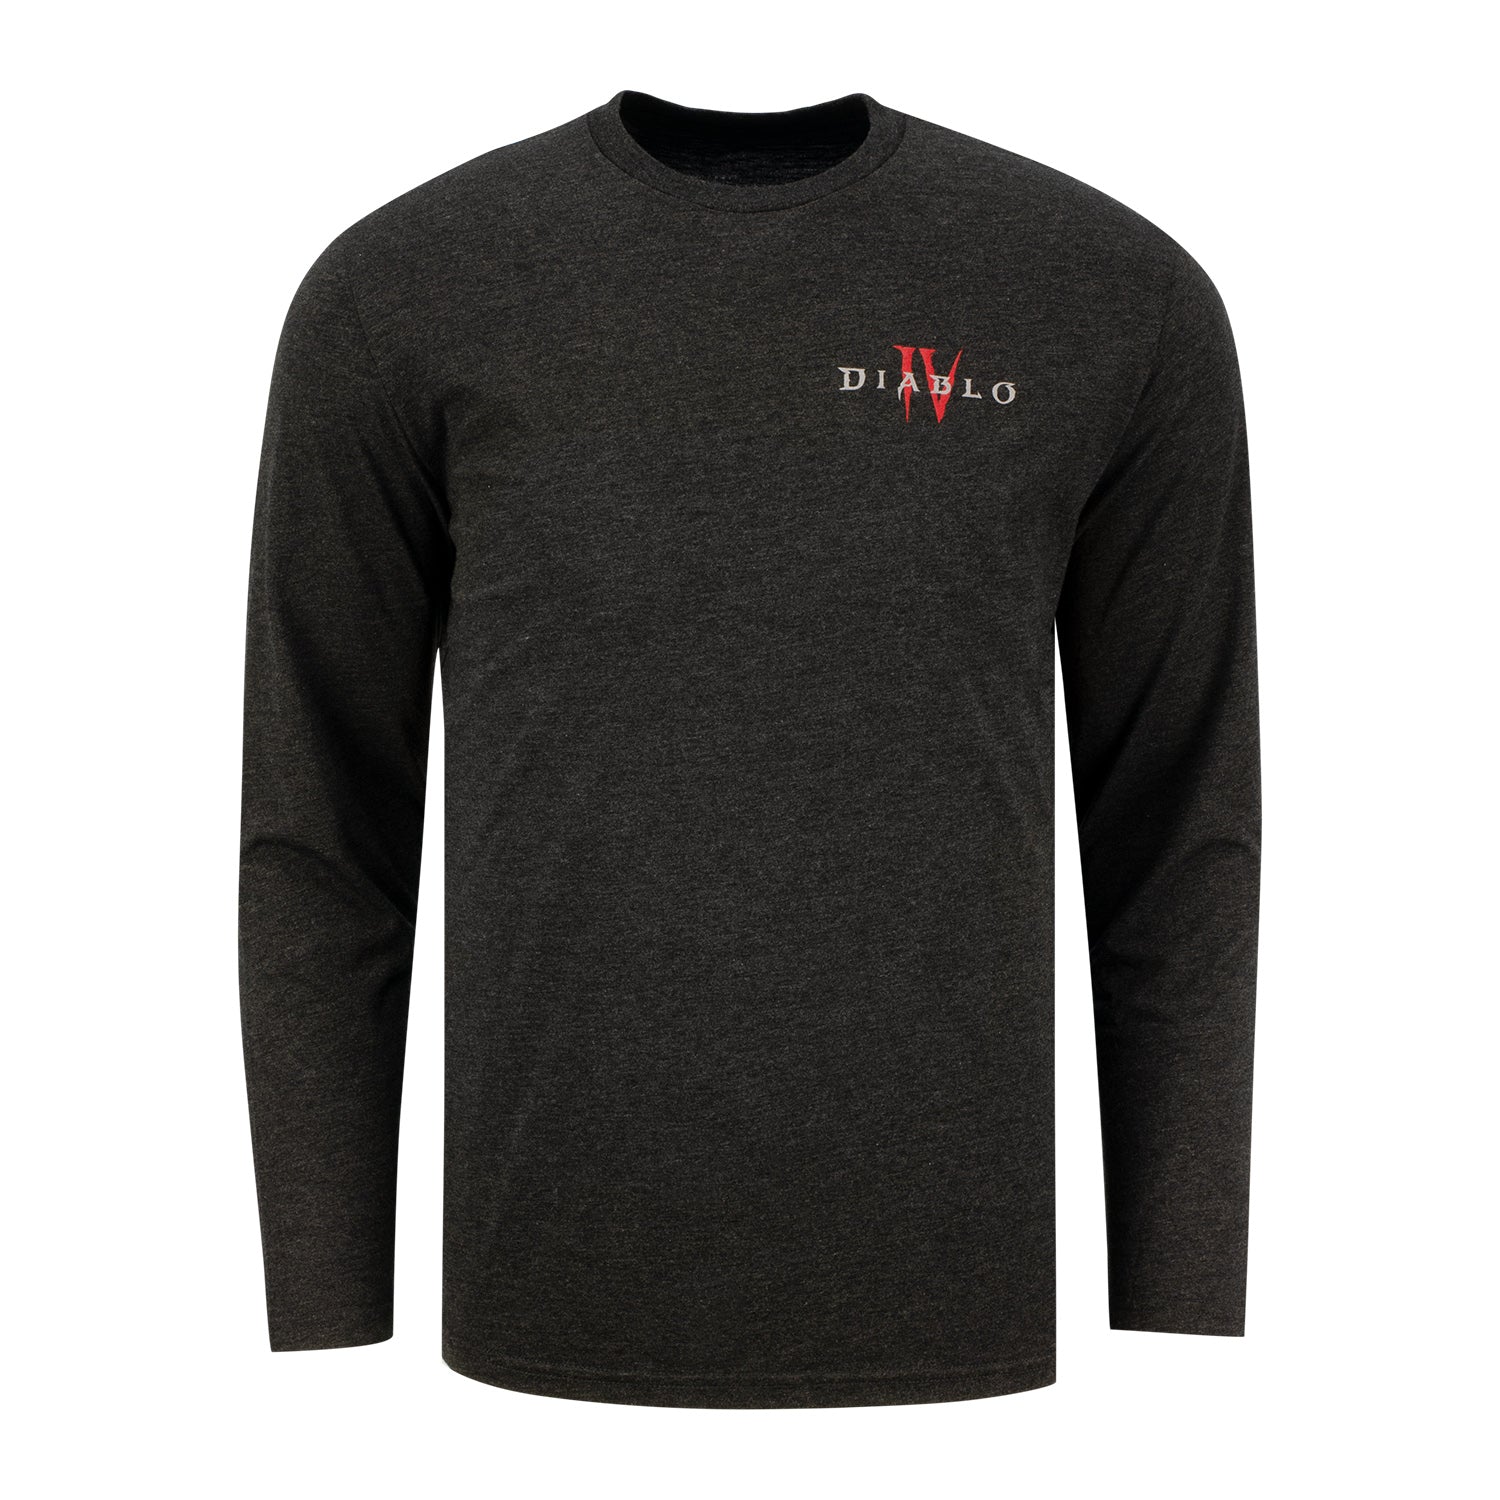 Diablo IV Charcoal Long Sleeve T-Shirt - Front View